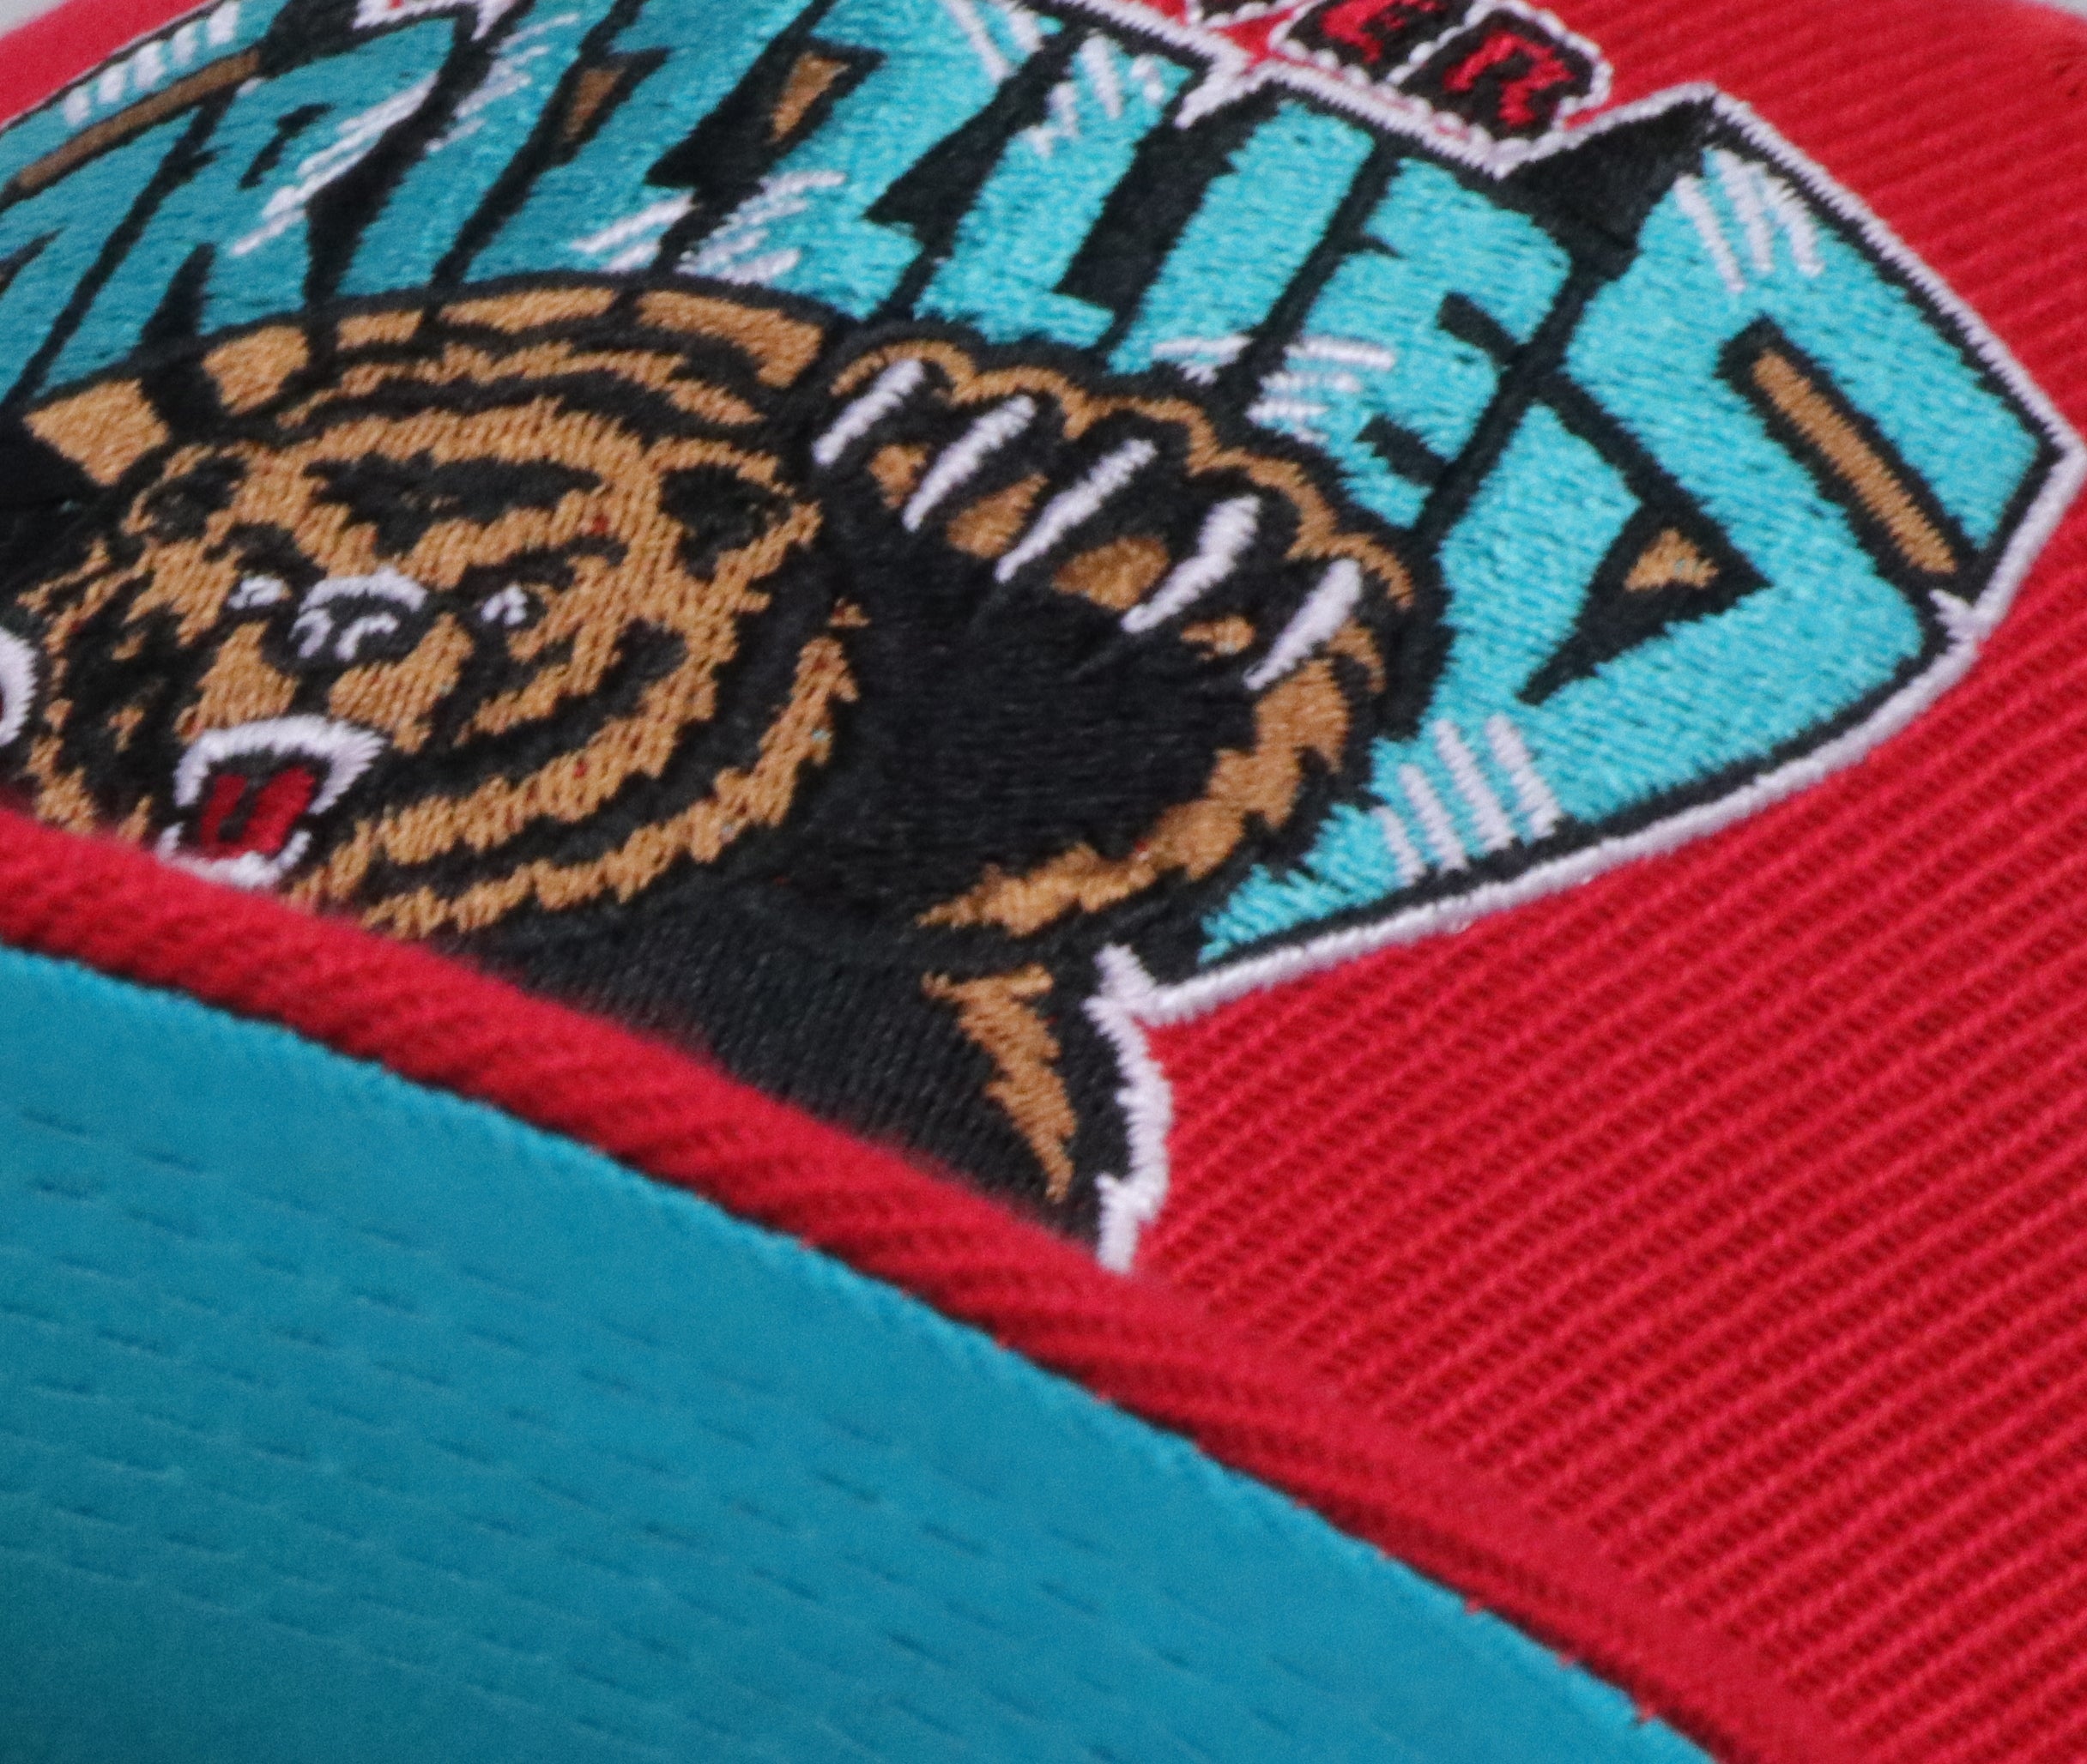 VANCOUVER GRIZZLIES (RED) (1995-1996 INAUGURAL SEASON) MITCHELL & NESS SNAPBACK (SH21475)